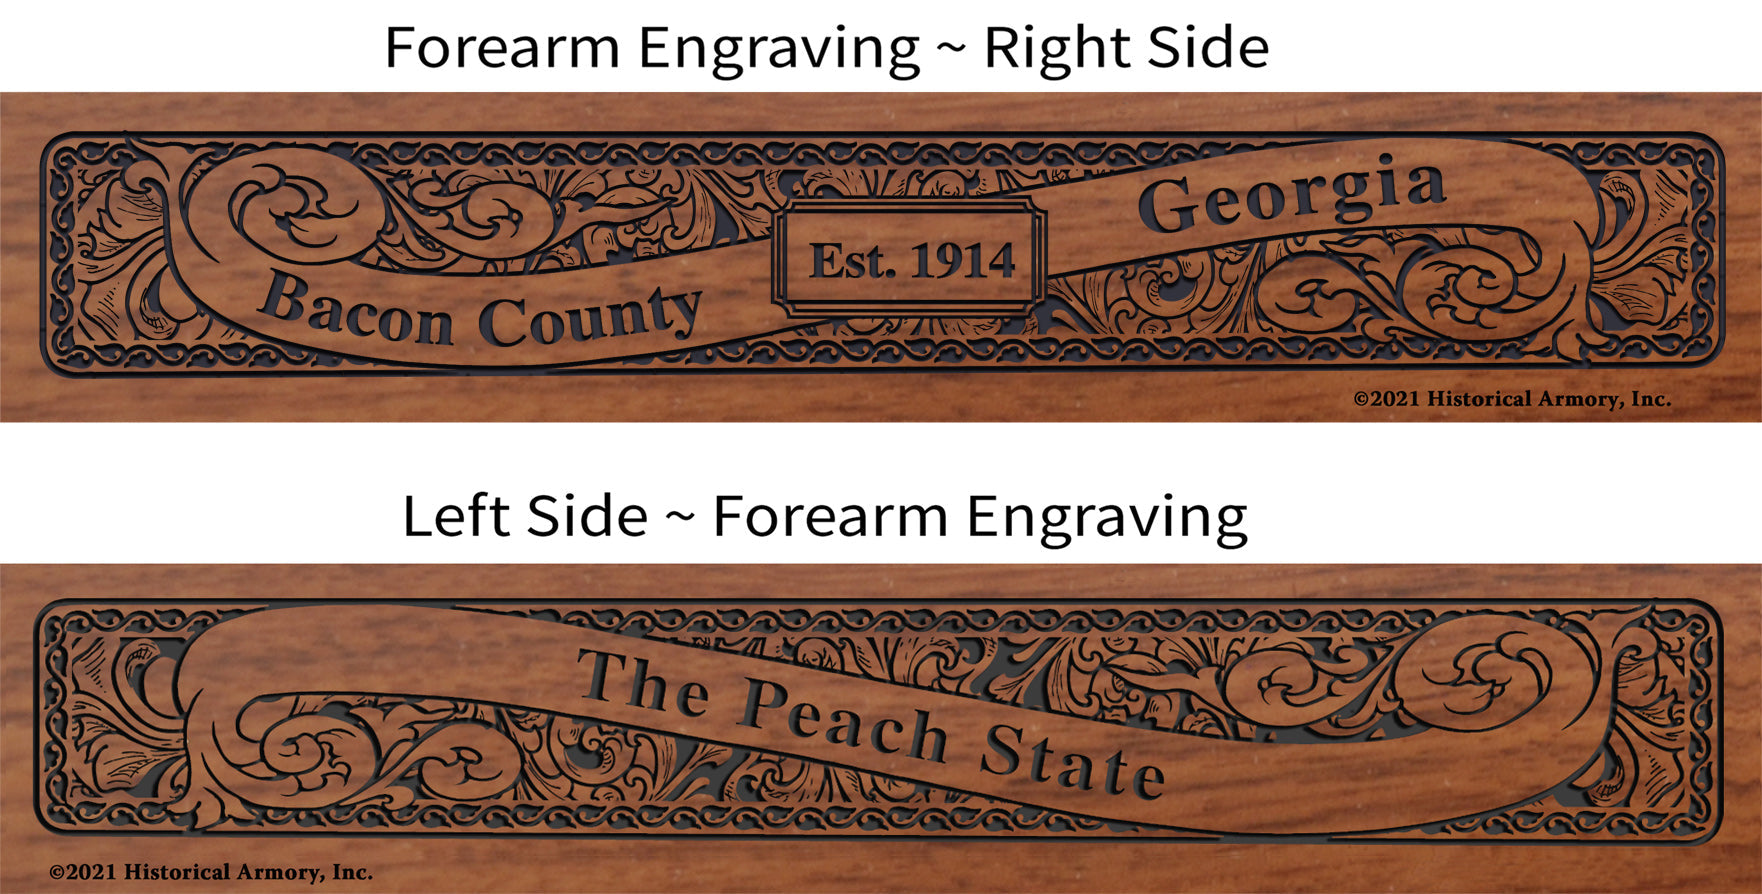 Bacon County Georgia Engraved Rifle Forearm Right-Side